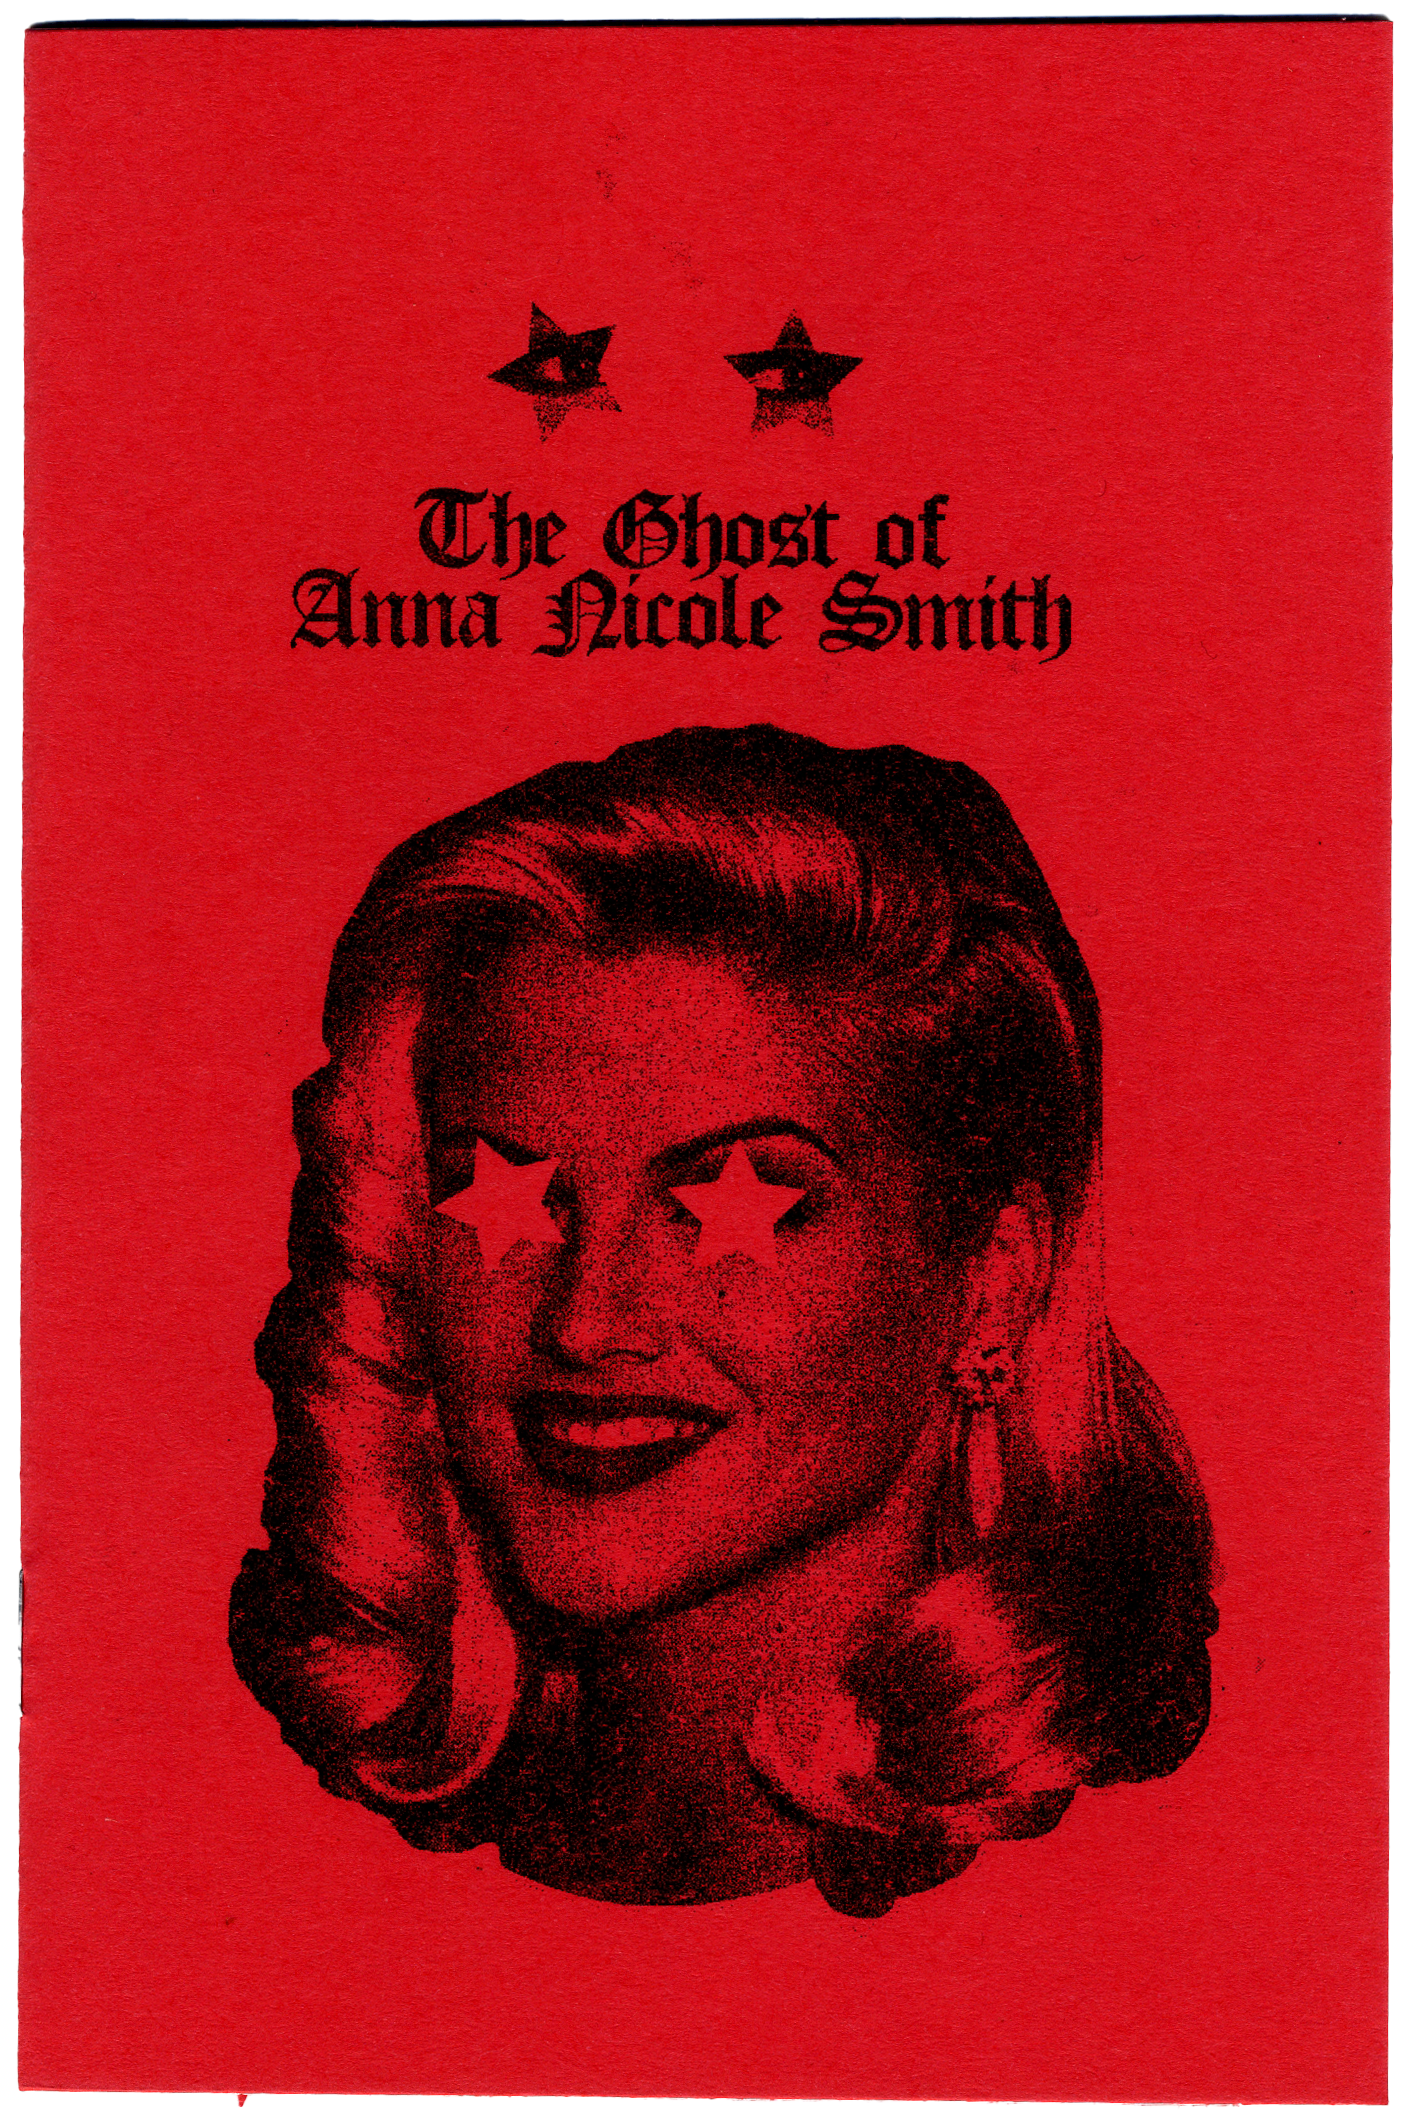 The Ghost of Anna Nicole Smith